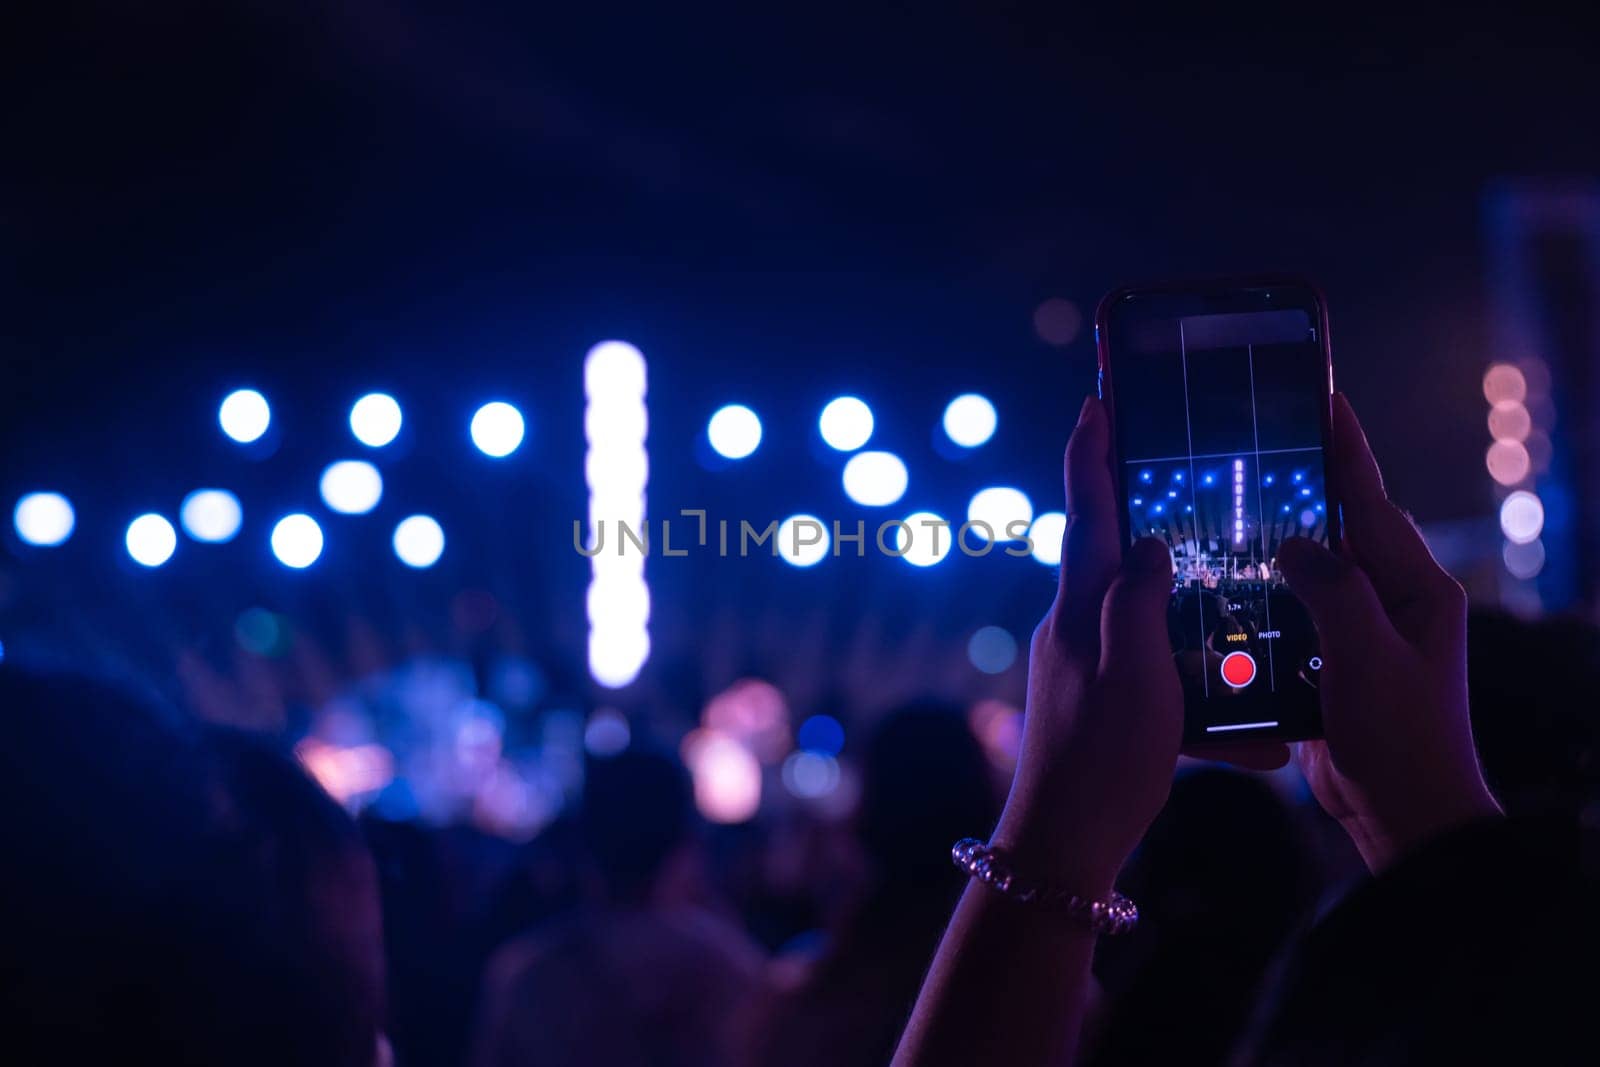 An electrifying concert festival during main event as cheering unrecognizable crowd gathers in front of brightly lit stage at night. lens flare adds to fun capturing excitement of music festival. by Sorapop